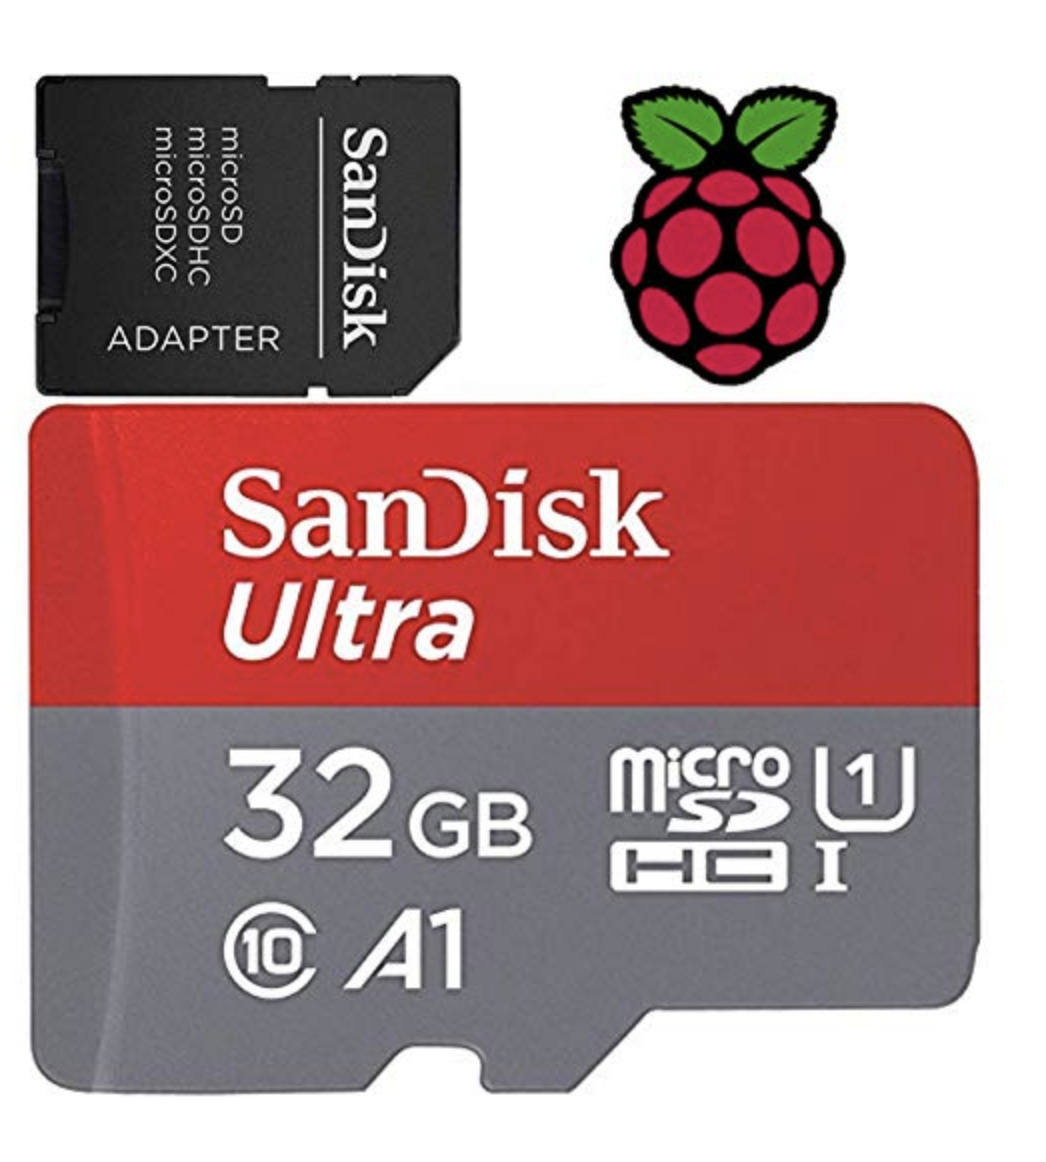  NOOBS 32GB SD card preloaded with NOOBS version 3.5.0 for Raspberry Pi 4